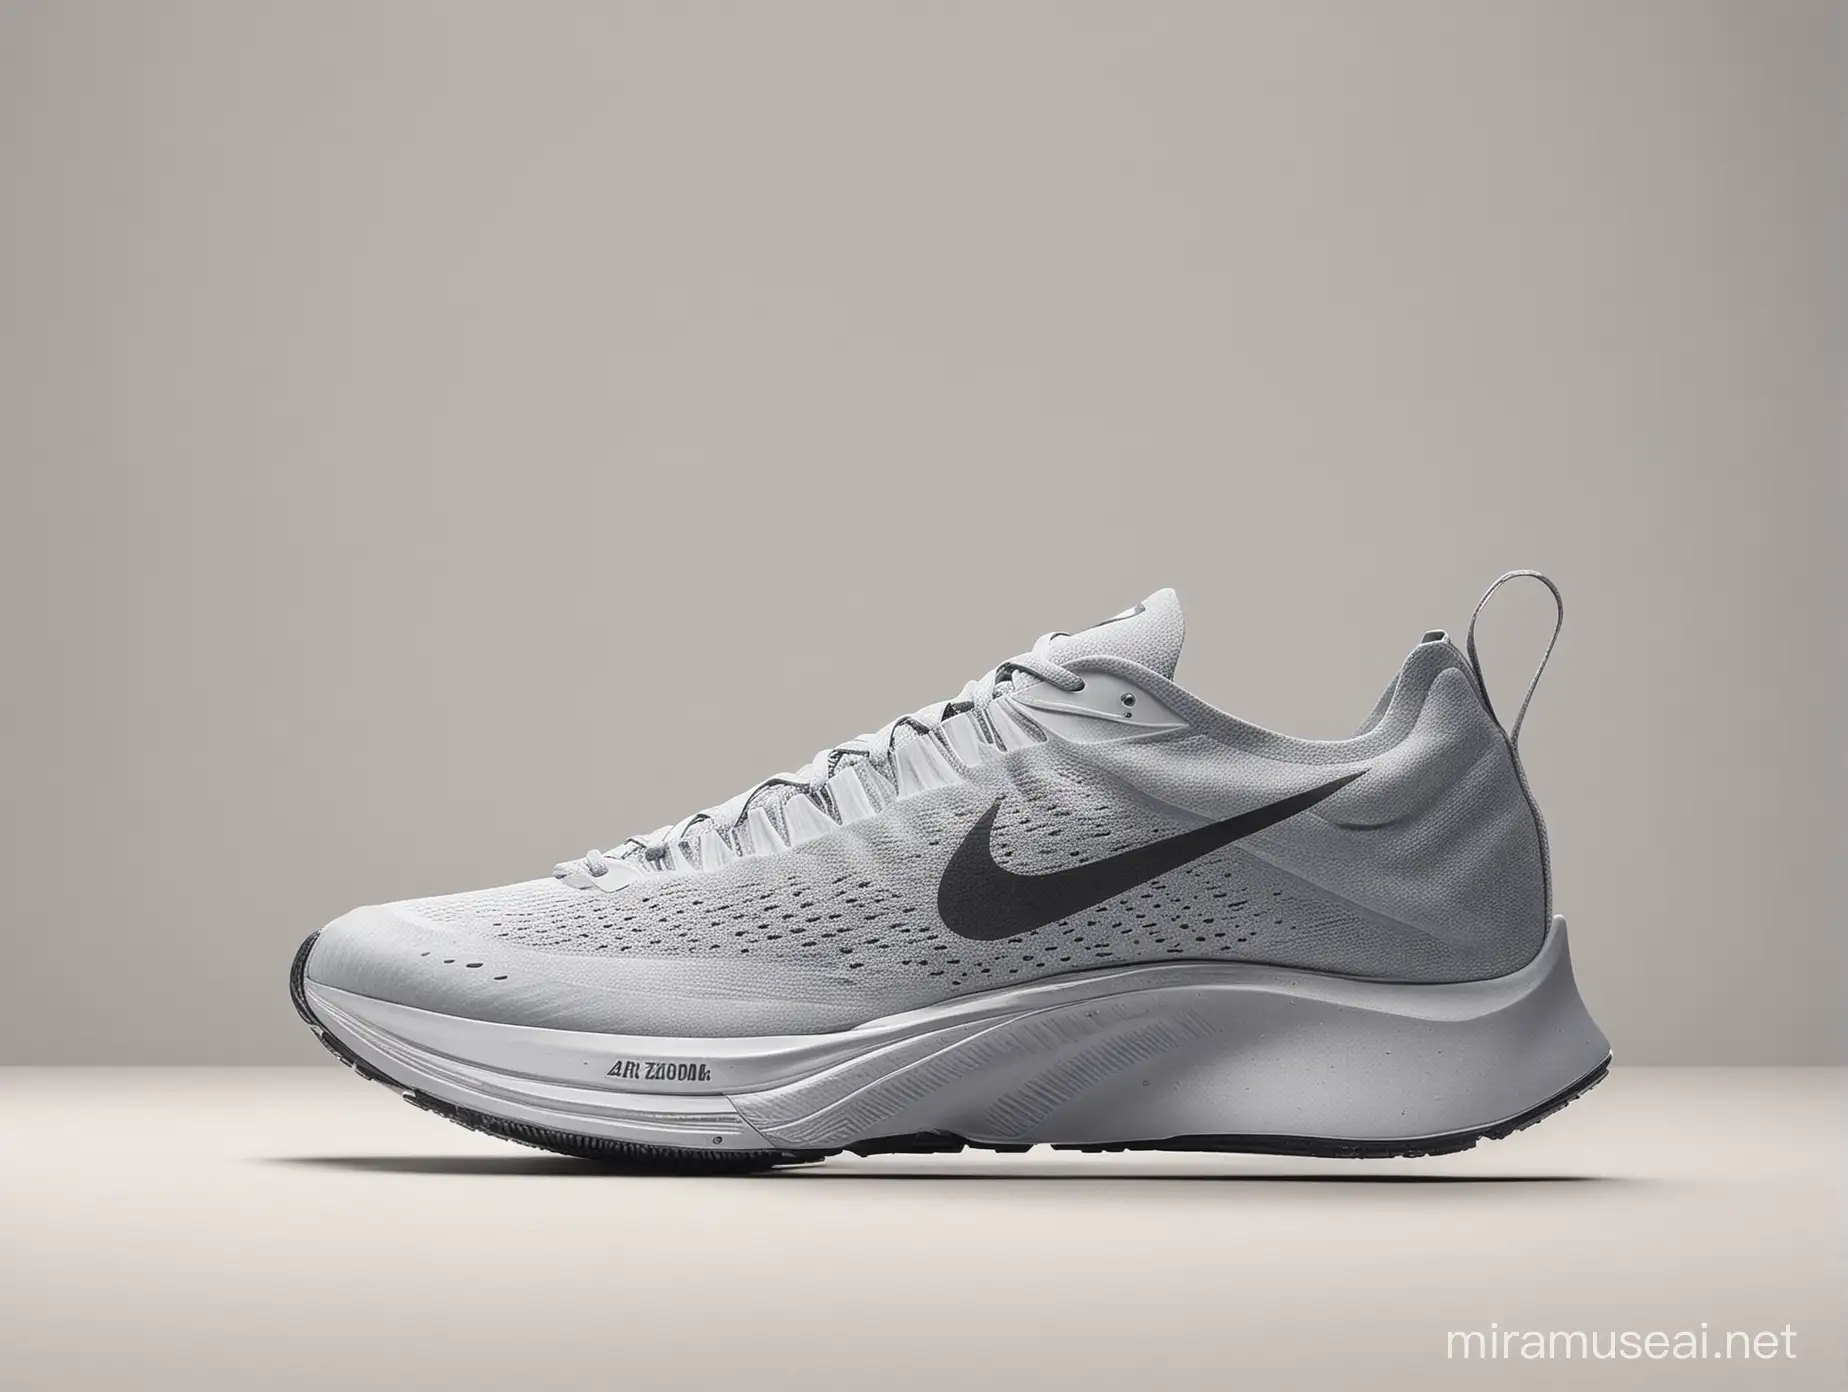 Nike Air Zoom Alphafly Running Shoes and the background is light gray